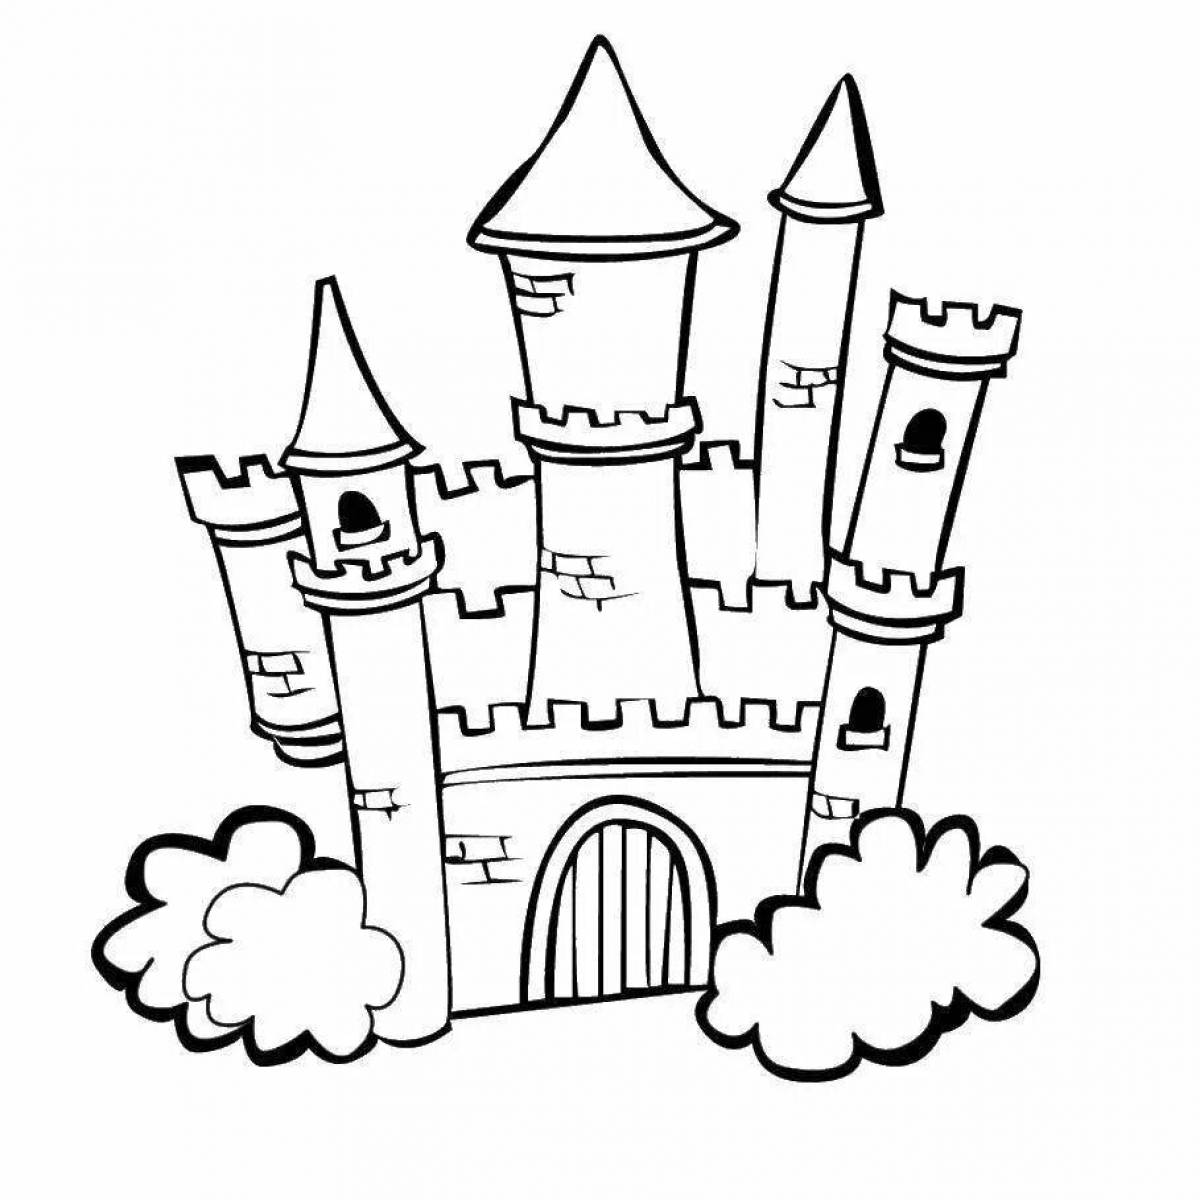 Shining castle coloring book for 4-5 year olds